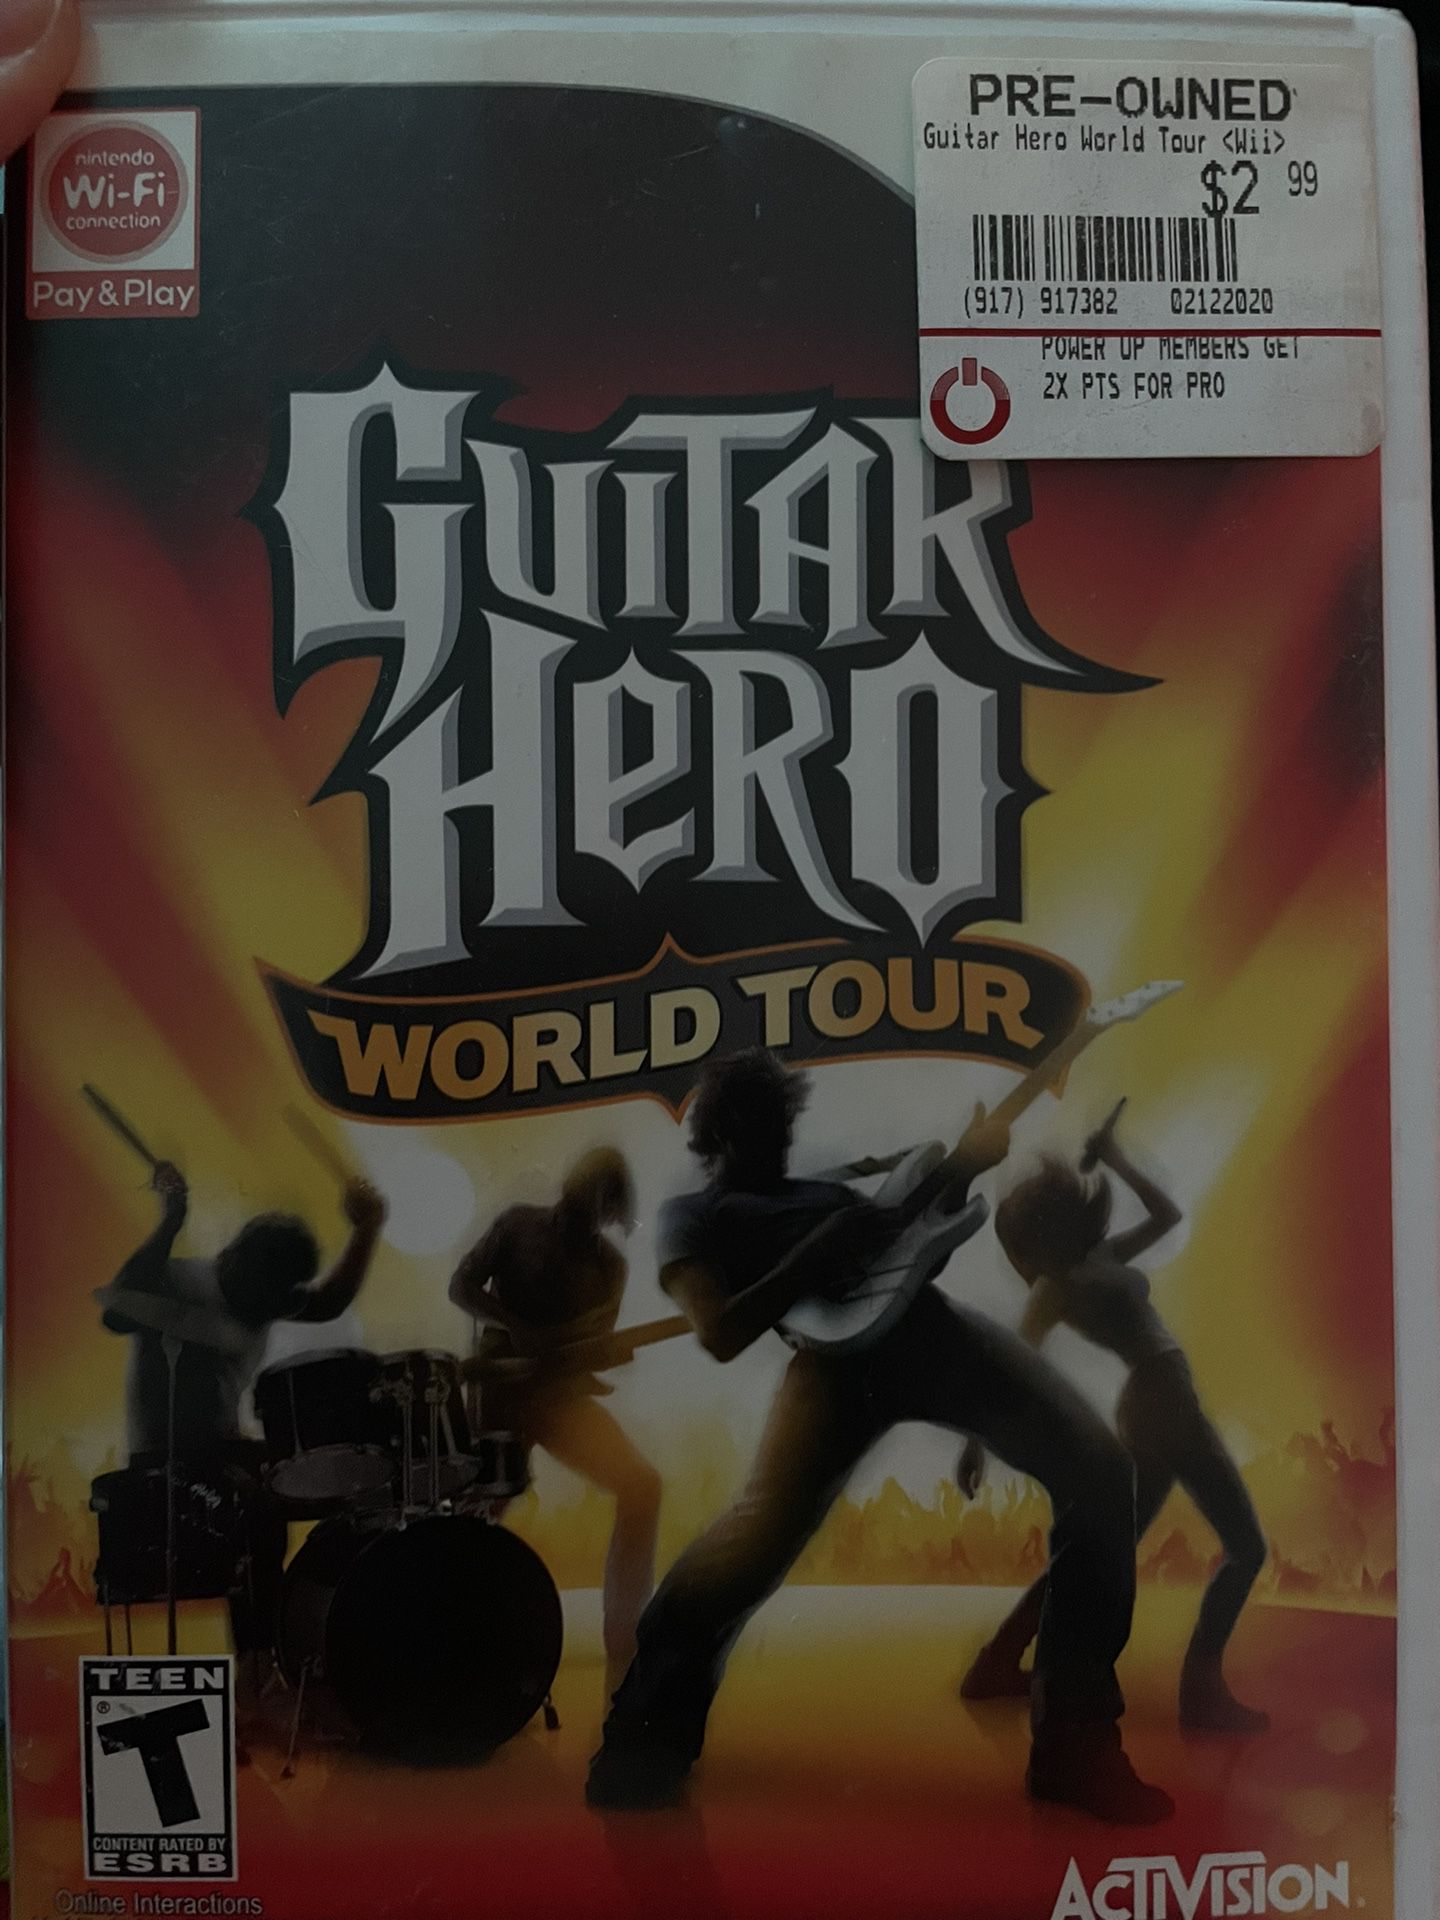 De vreemdeling ontwerp Marco Polo Guitar Hero: World Tour- For Wii for Sale in Brooklyn, NY - OfferUp